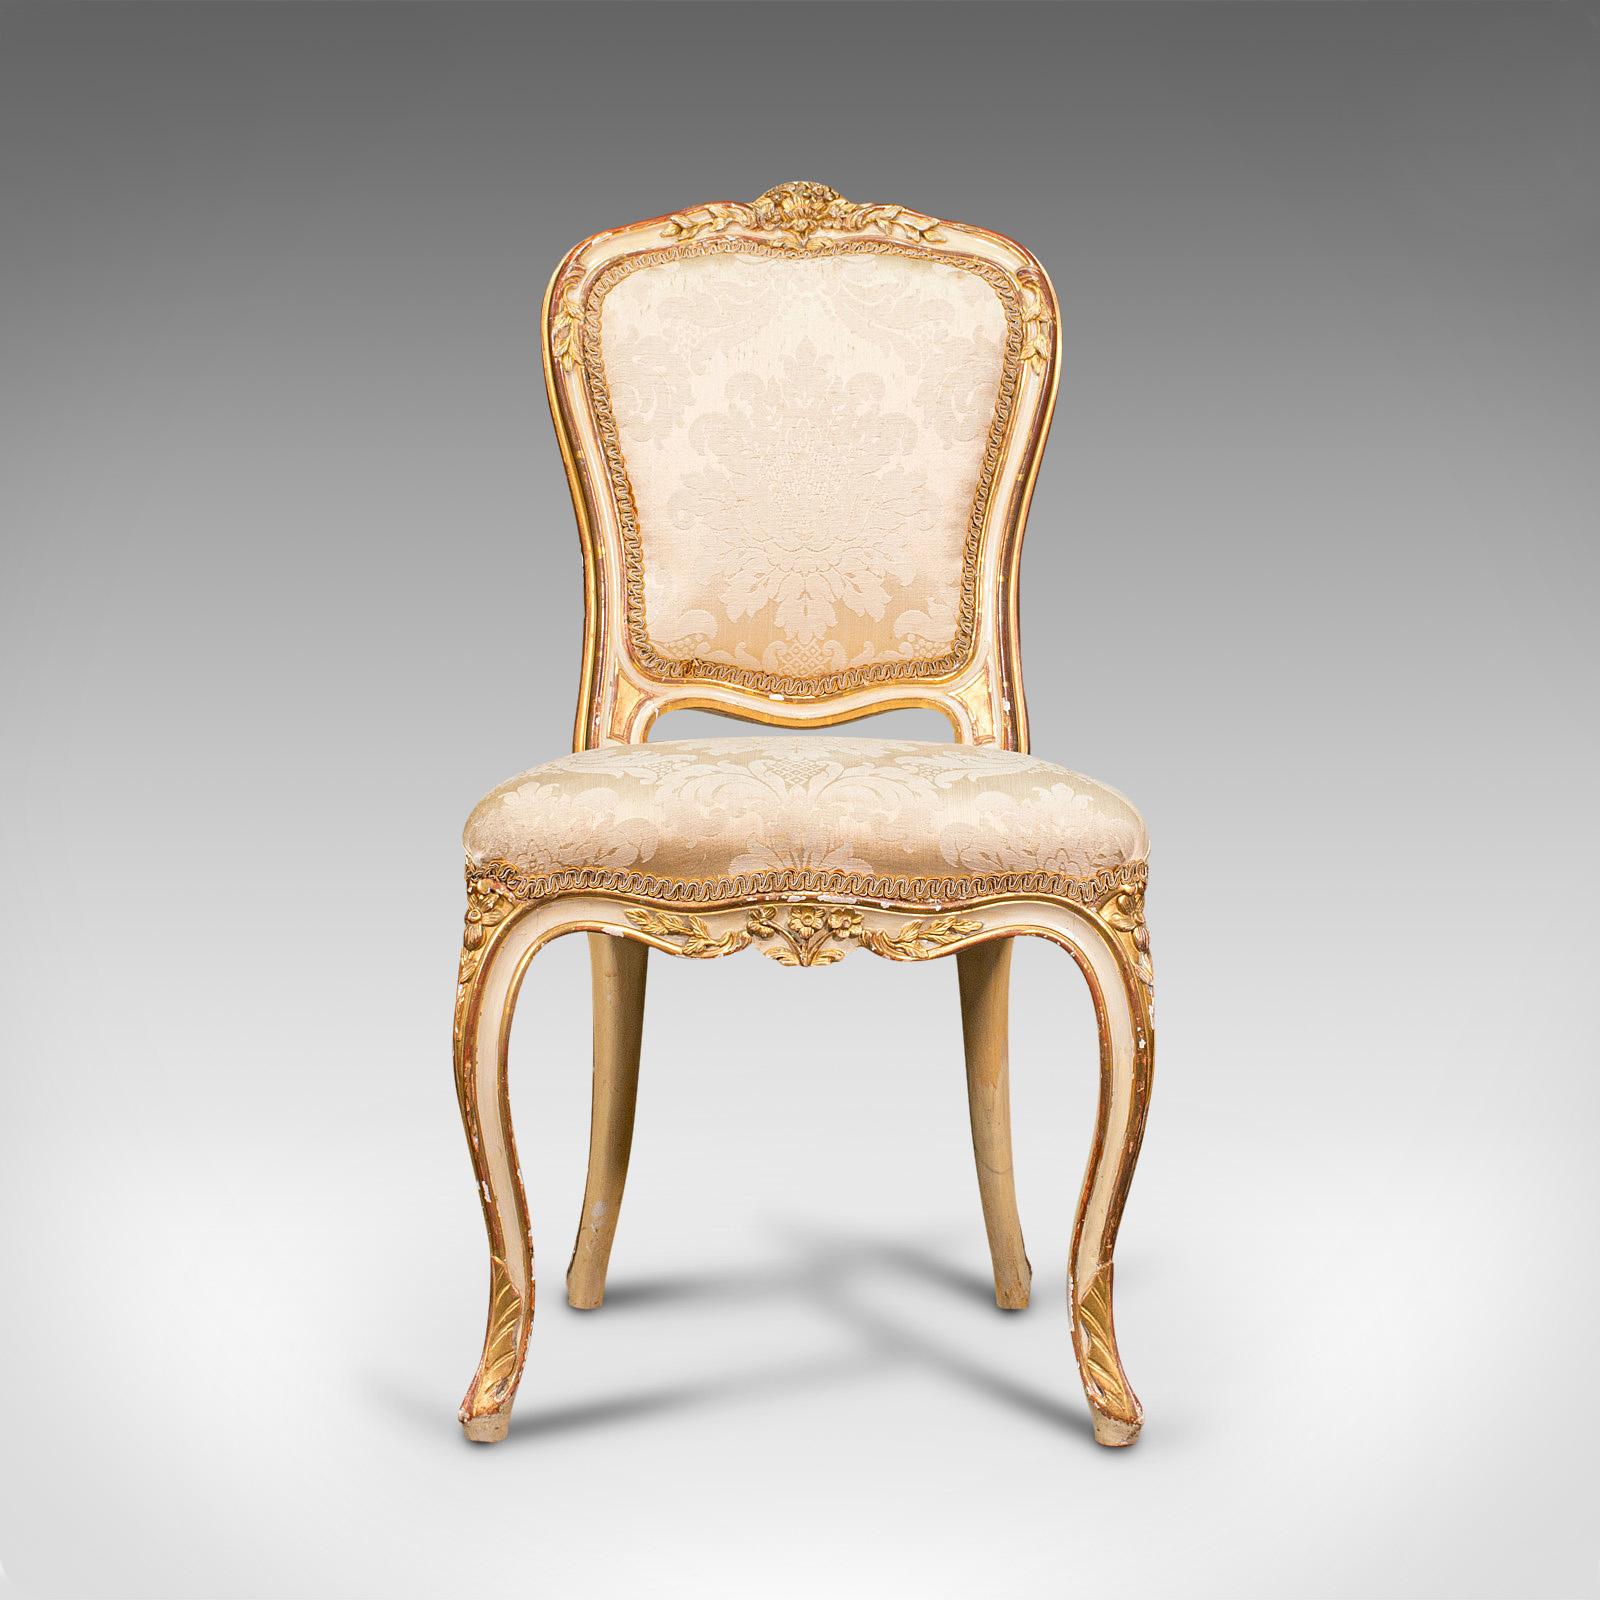 This is an antique boudoir chair. A French, giltwood and silk cotton bedroom dressing seat, dating to the Victorian period, circa 1900.

Beautiful small chair set to grace any room
Displays a desirable aged patina, some marks commensurate with